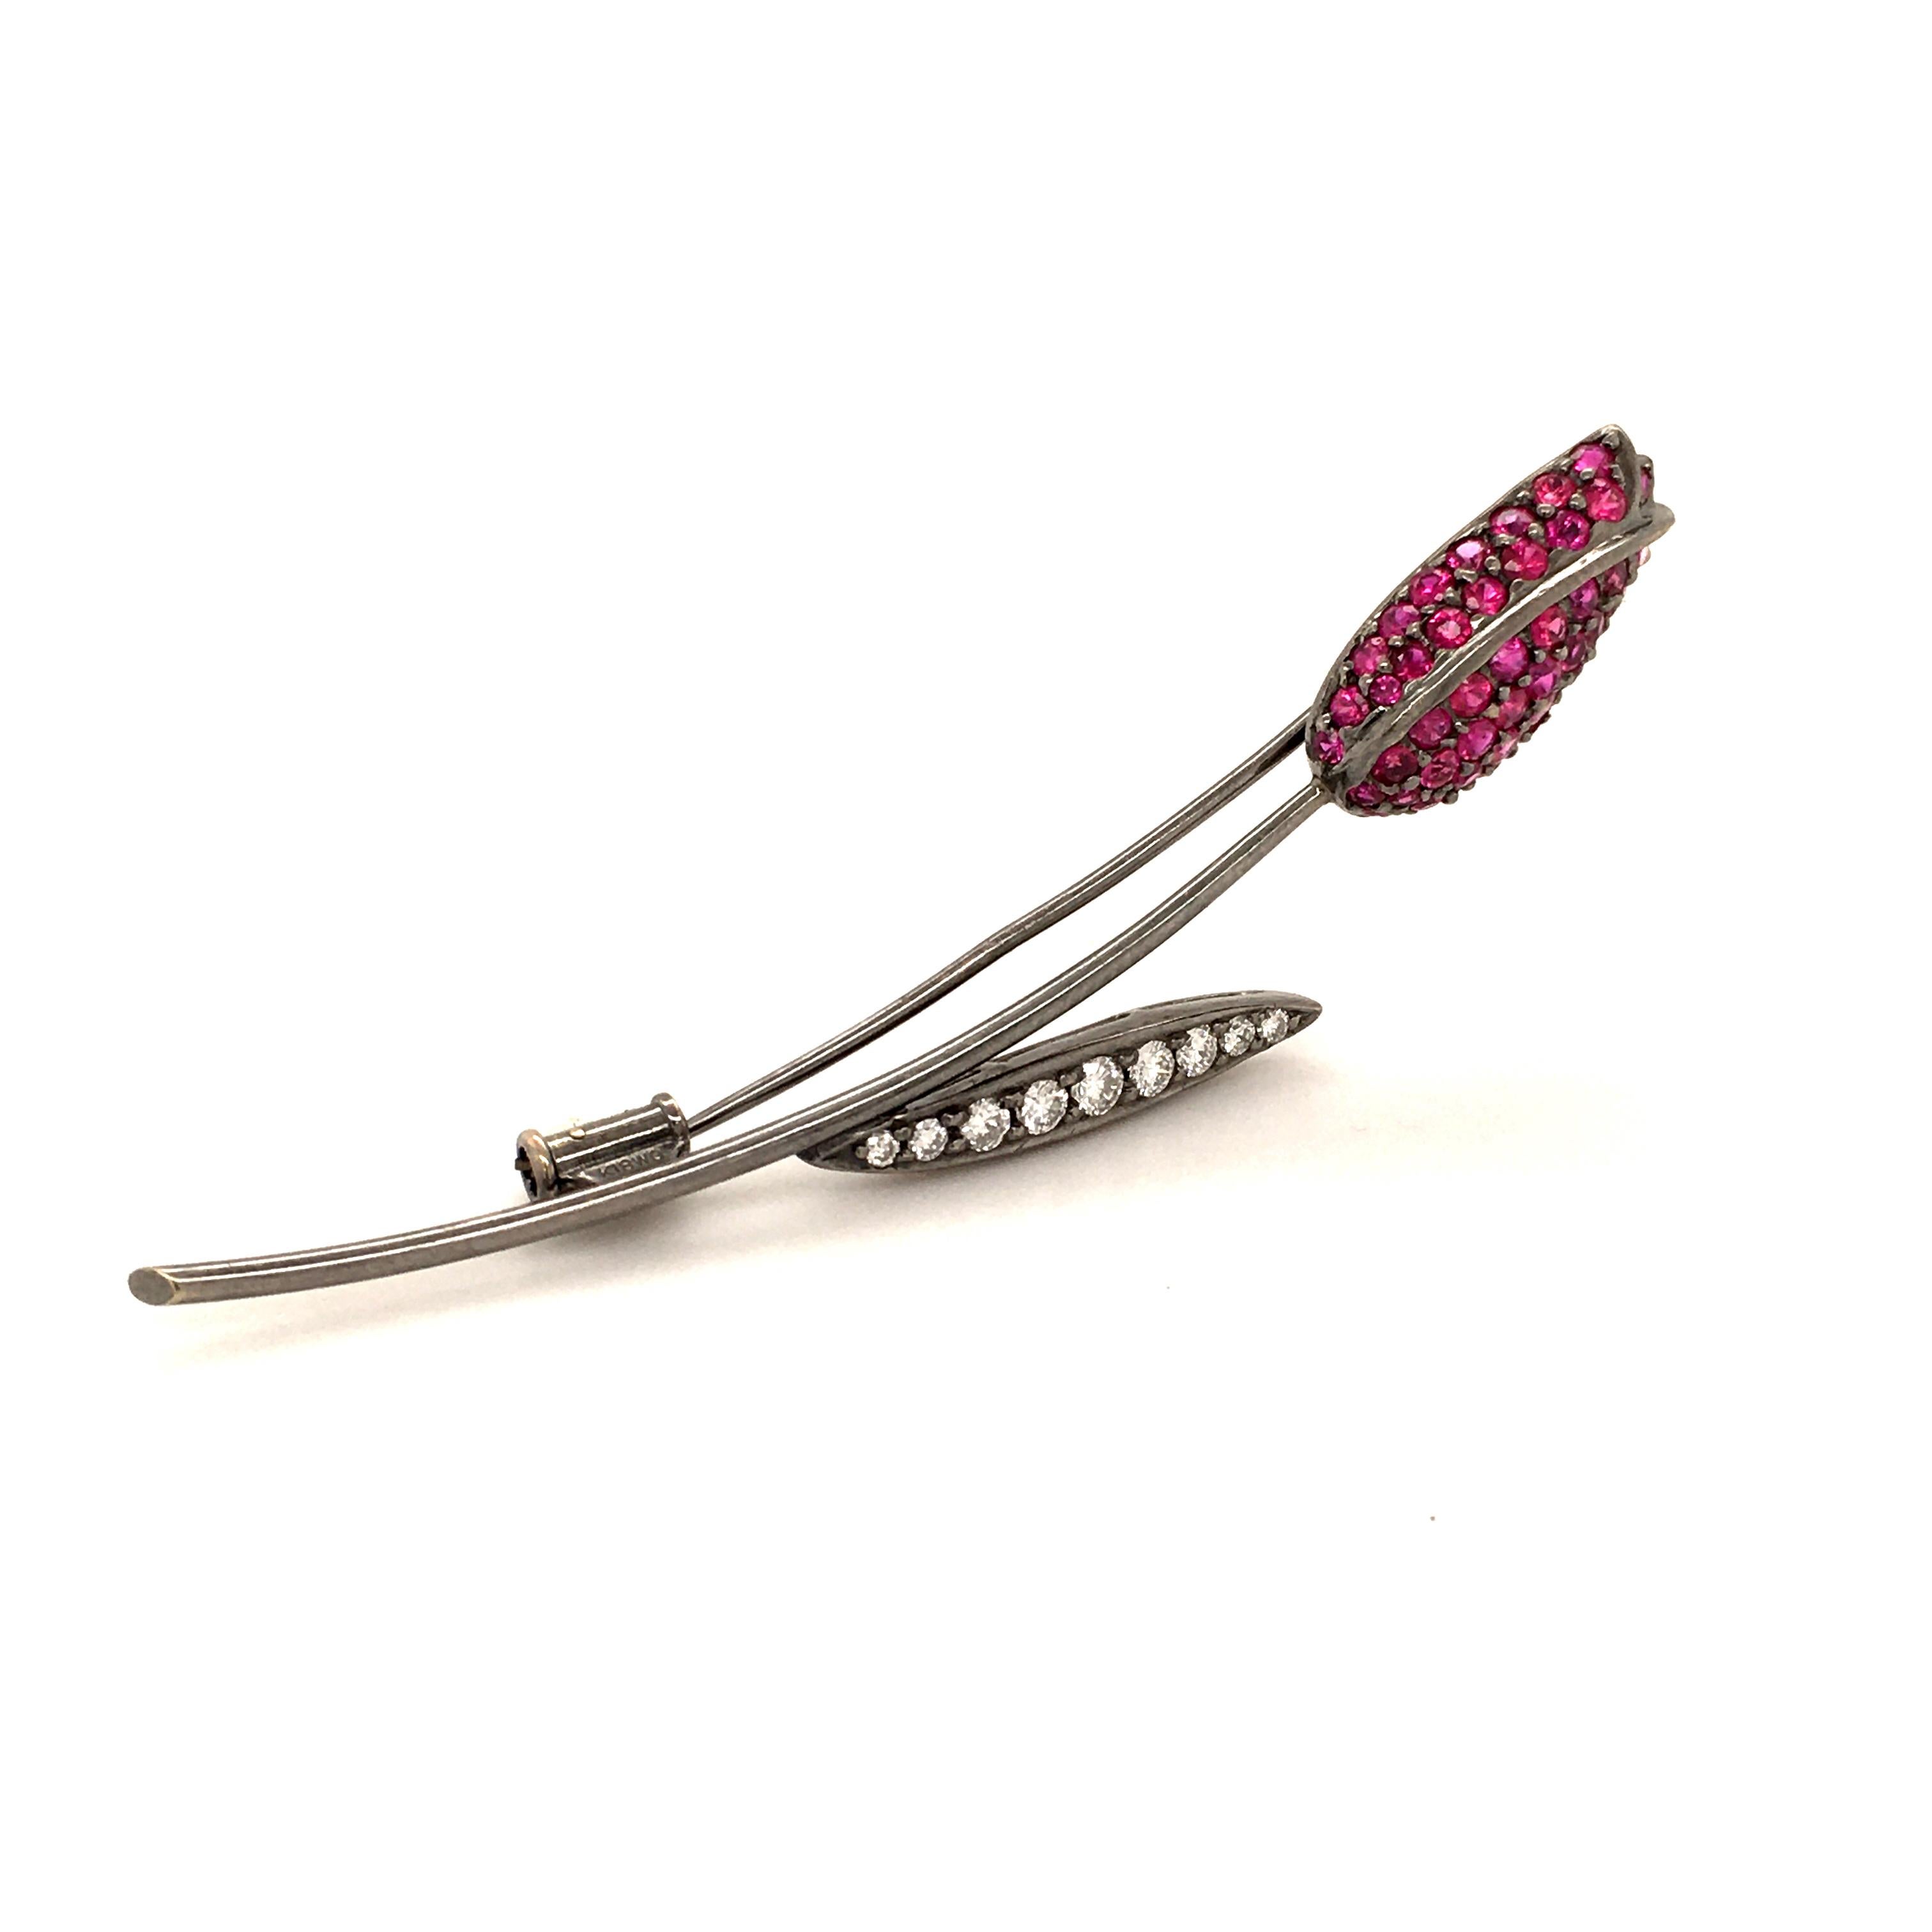 Elegant Tulip brooch in blackened white gold 18 Karat – meaning the piece of jewellery is plated with a black rhodium finish to give it it’s dark look. The petals are carefully set with 53 brilliant-cut, vibrant red rubies totalling 2.70 ct.